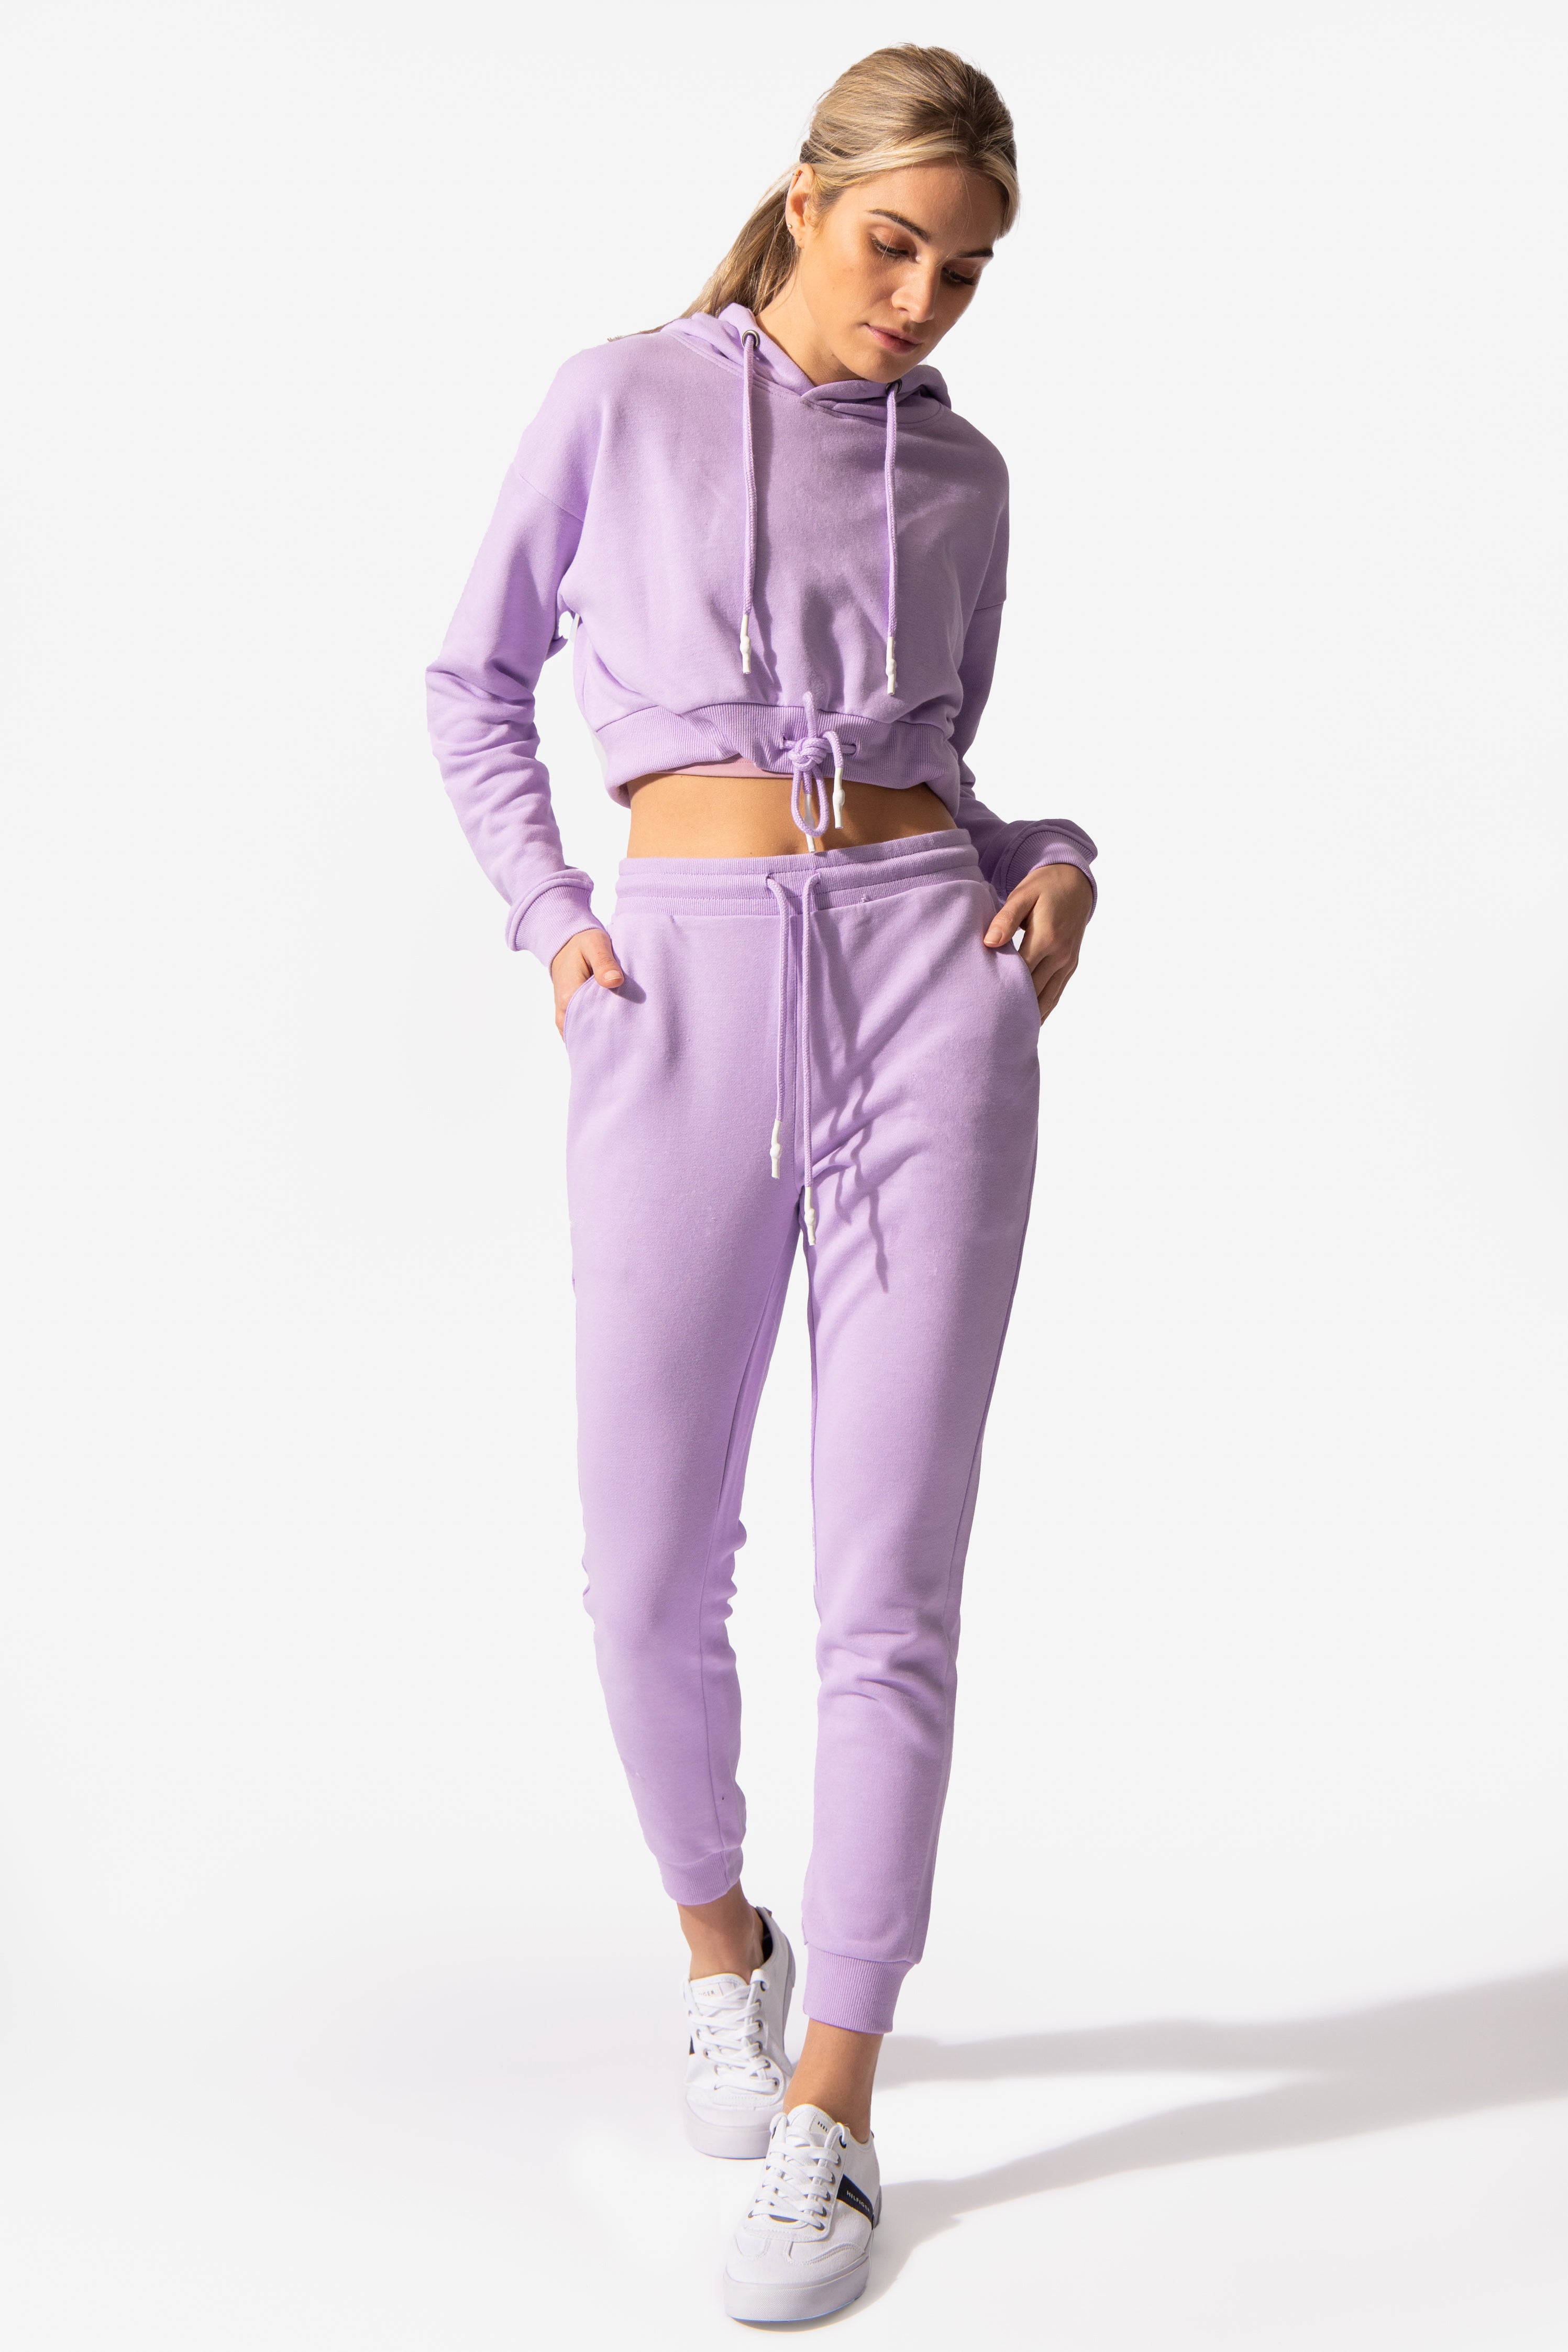 Women's Stretchy Lounge Jogger Pants - Purple Women's Joggers Jed North 